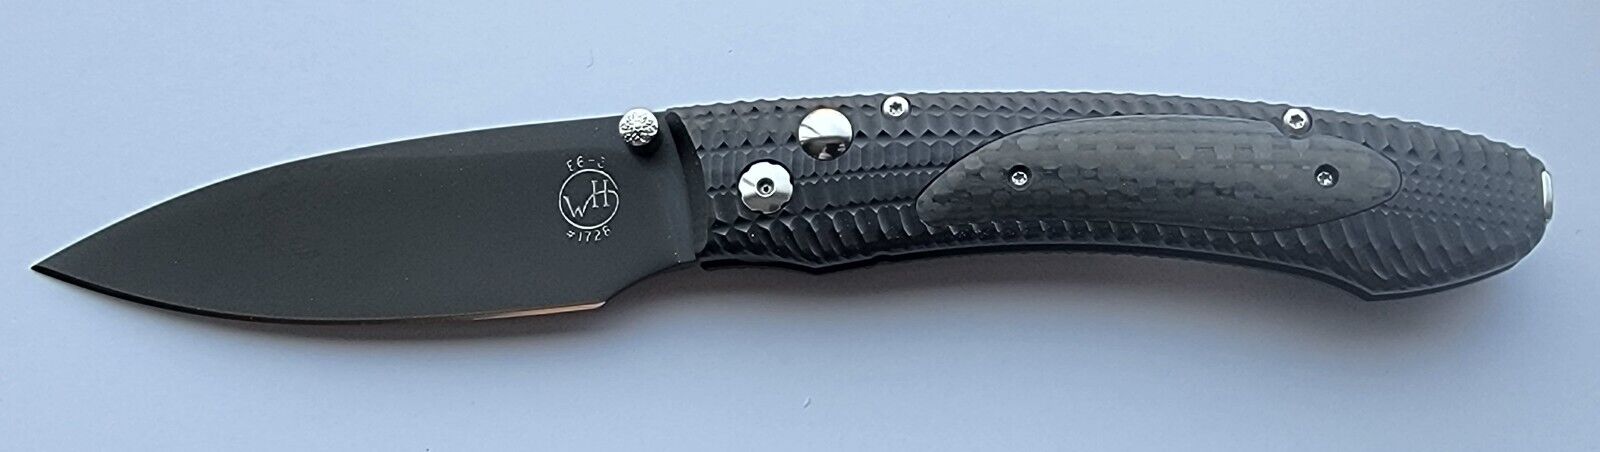 William Henry E6-3 with carbon fiber inlay